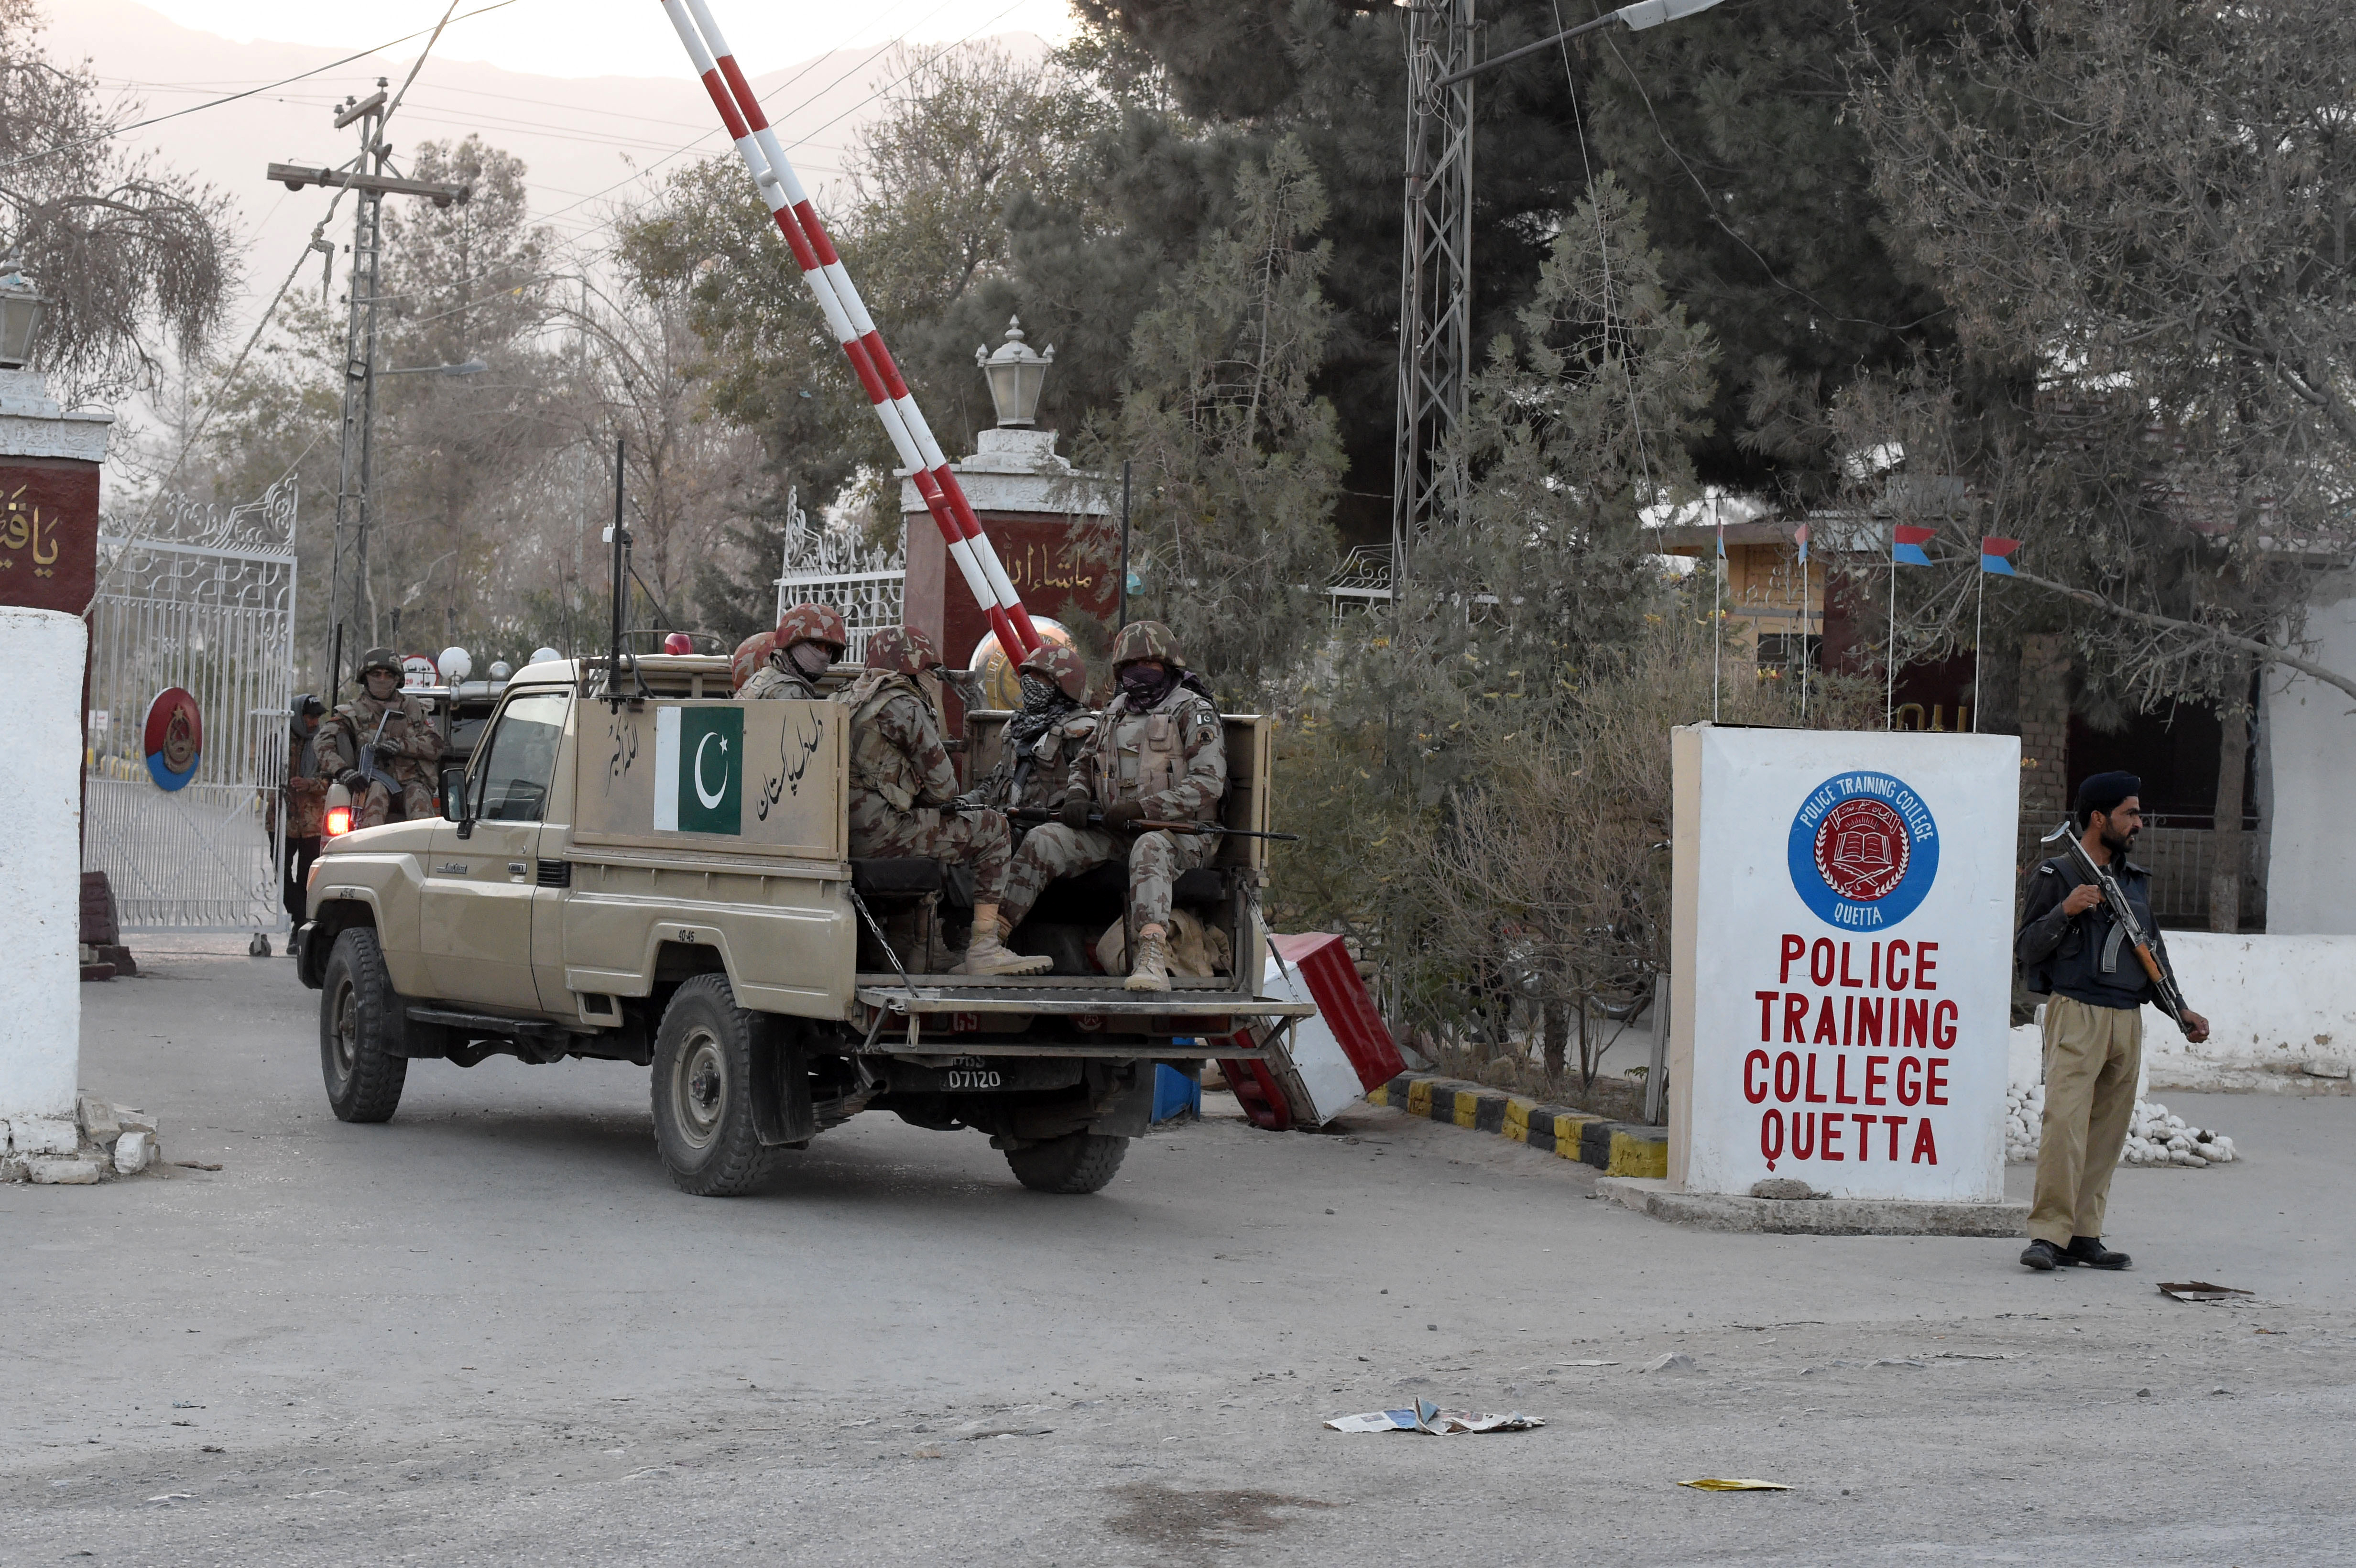 Pakistani soldiers pass through the entrance to The Police Training College in Quetta on October 25, 2016, after an overnight militant attack on the establishment. The death toll from an overnight attack on a police academy in southwest Pakistan has risen to 58 people with dozens more wounded, officials said, in one of the deadliest extremist attacks this year. / AFP PHOTO / BANARAS KHAN